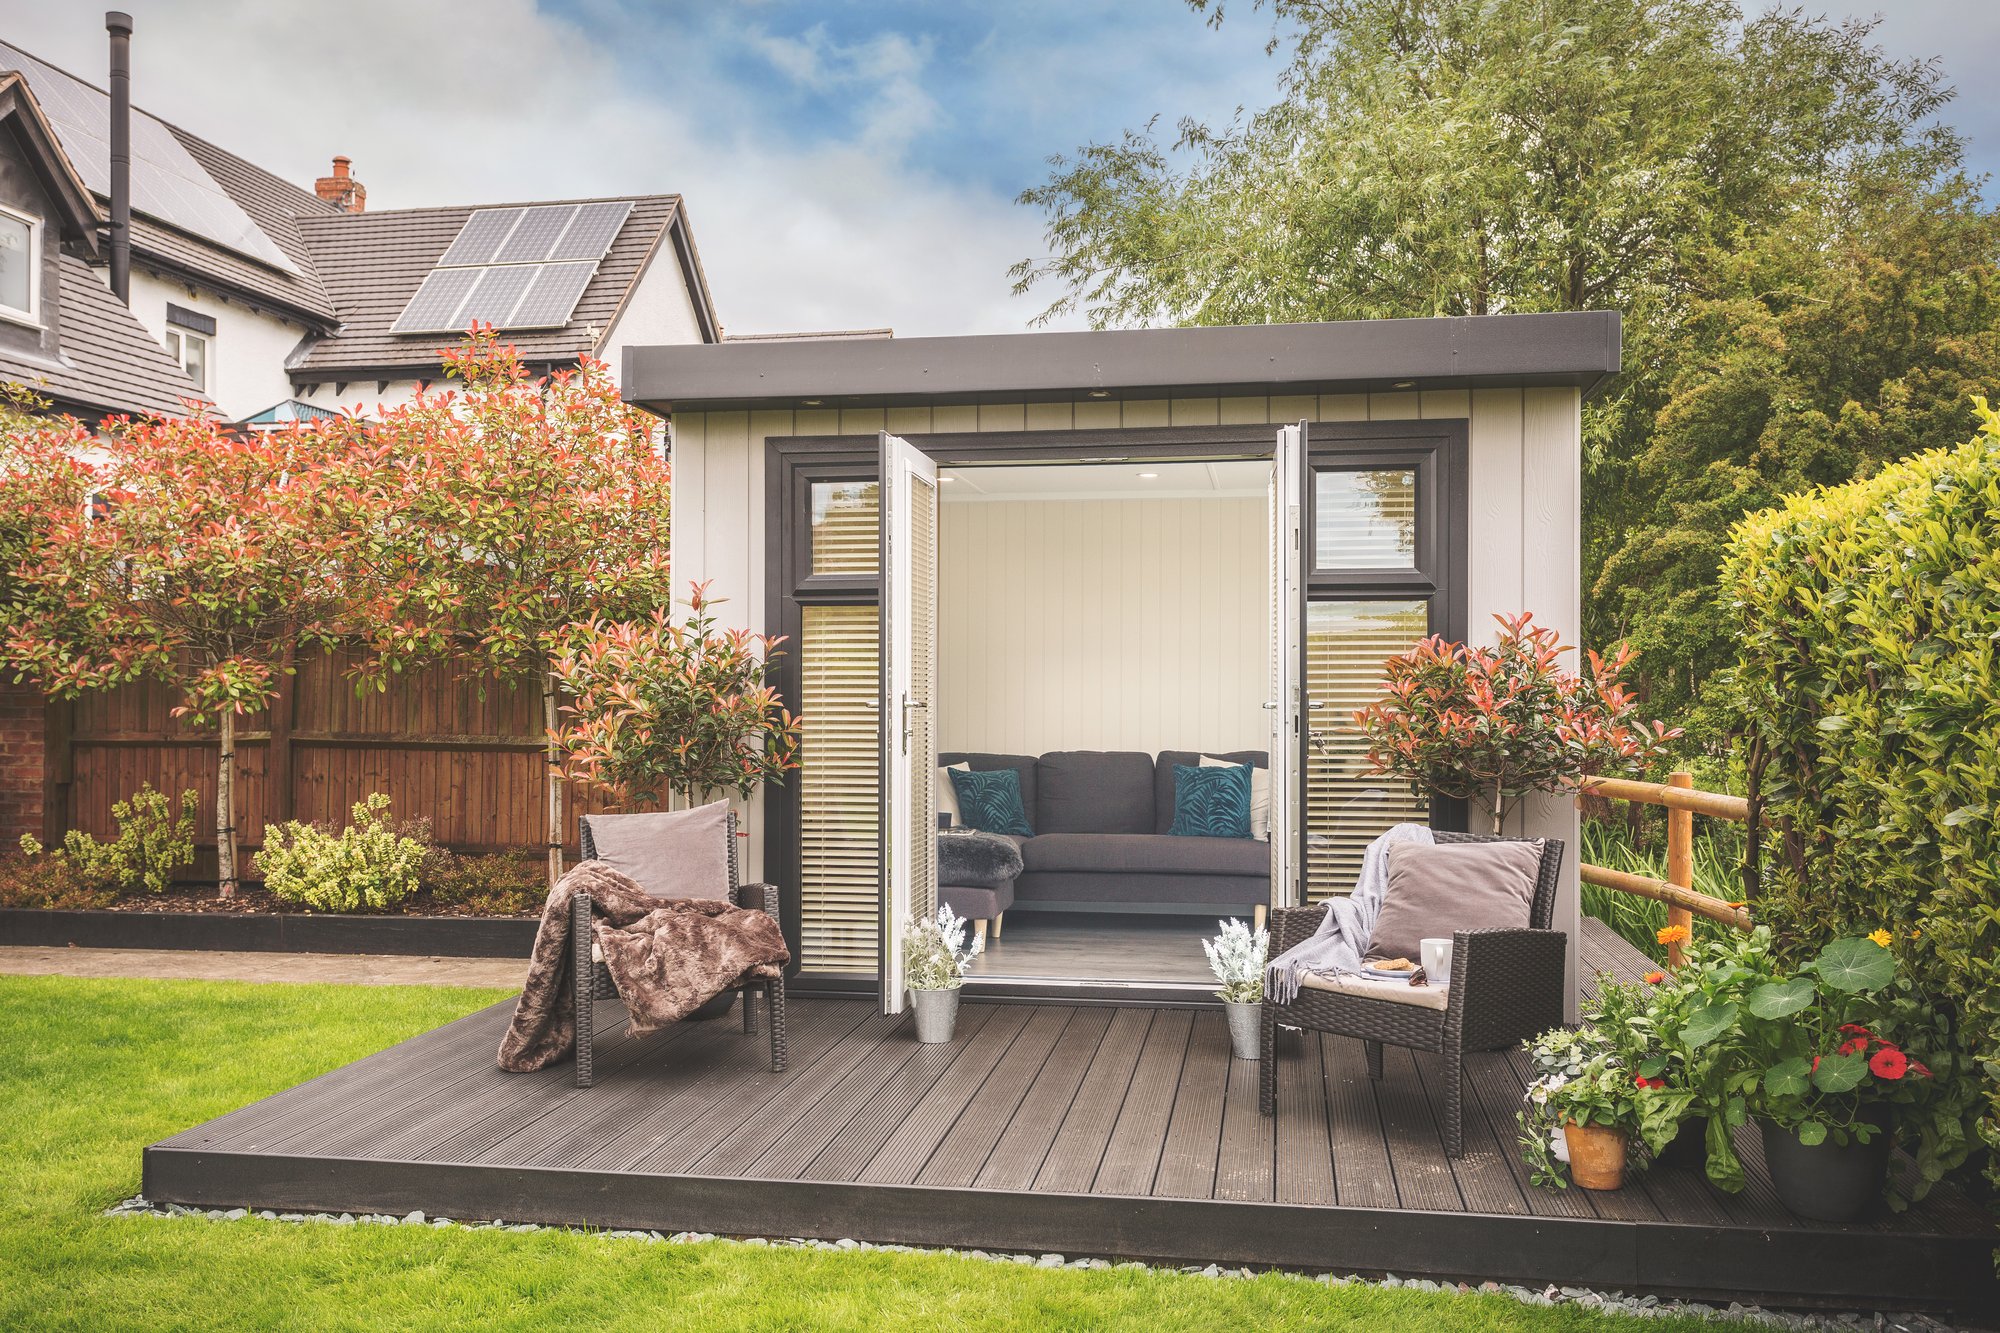 Small garden summerhouse with large timber decking in front and 2 rattan armchairs with throws on top of decking.